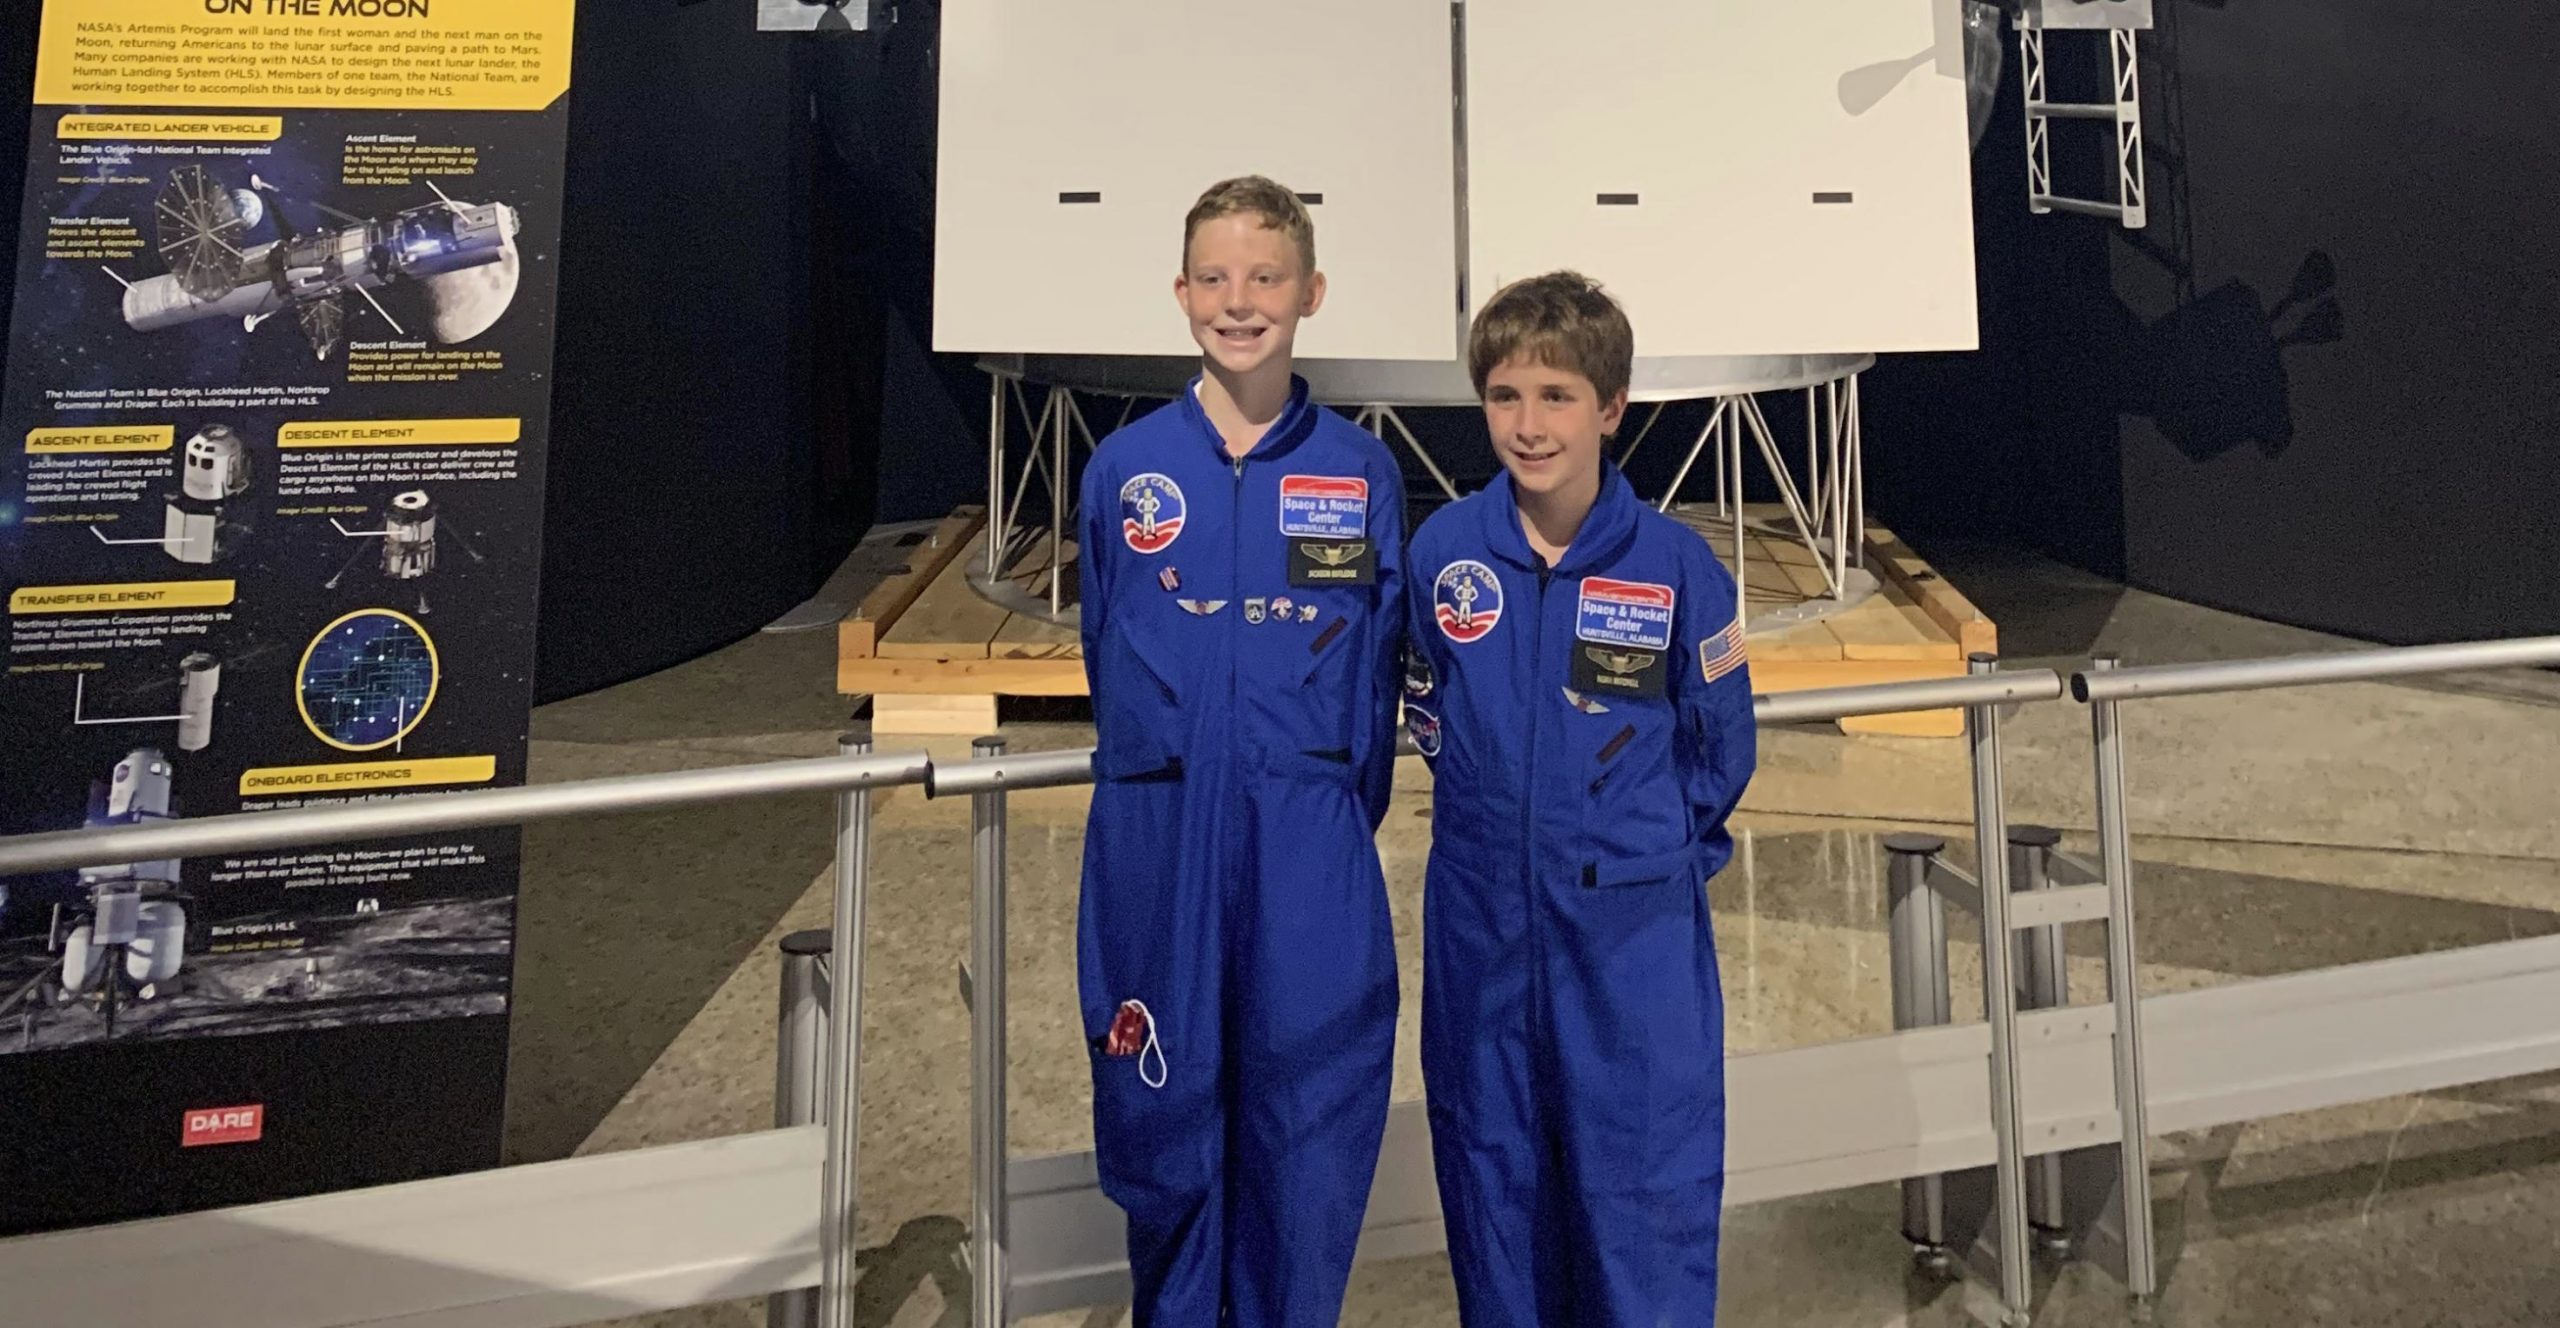 Trussville best friends go to 'infinity and beyond' at Space Camp